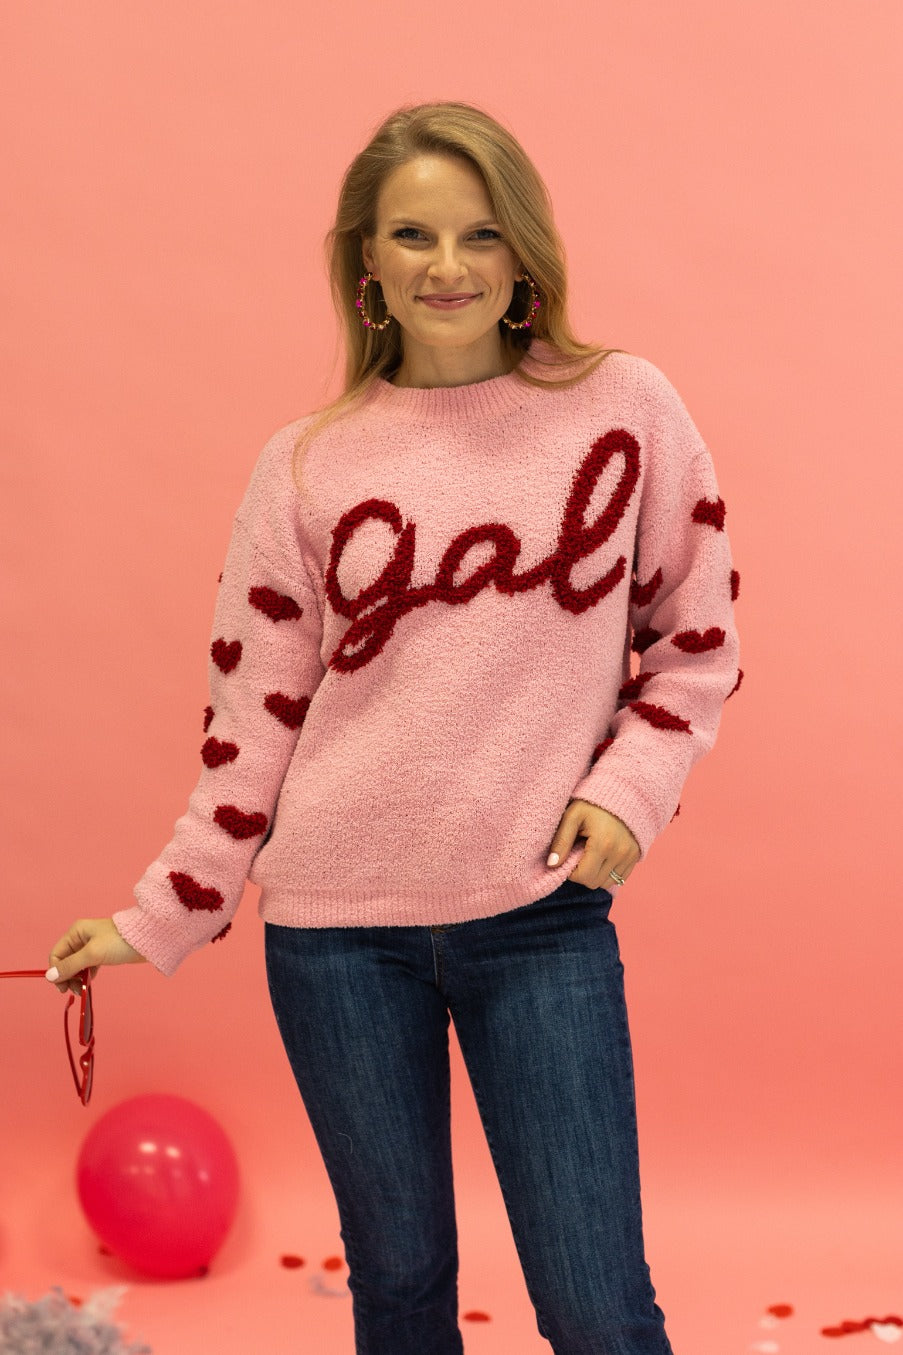 Gal on Pink Fuzzy Sweater